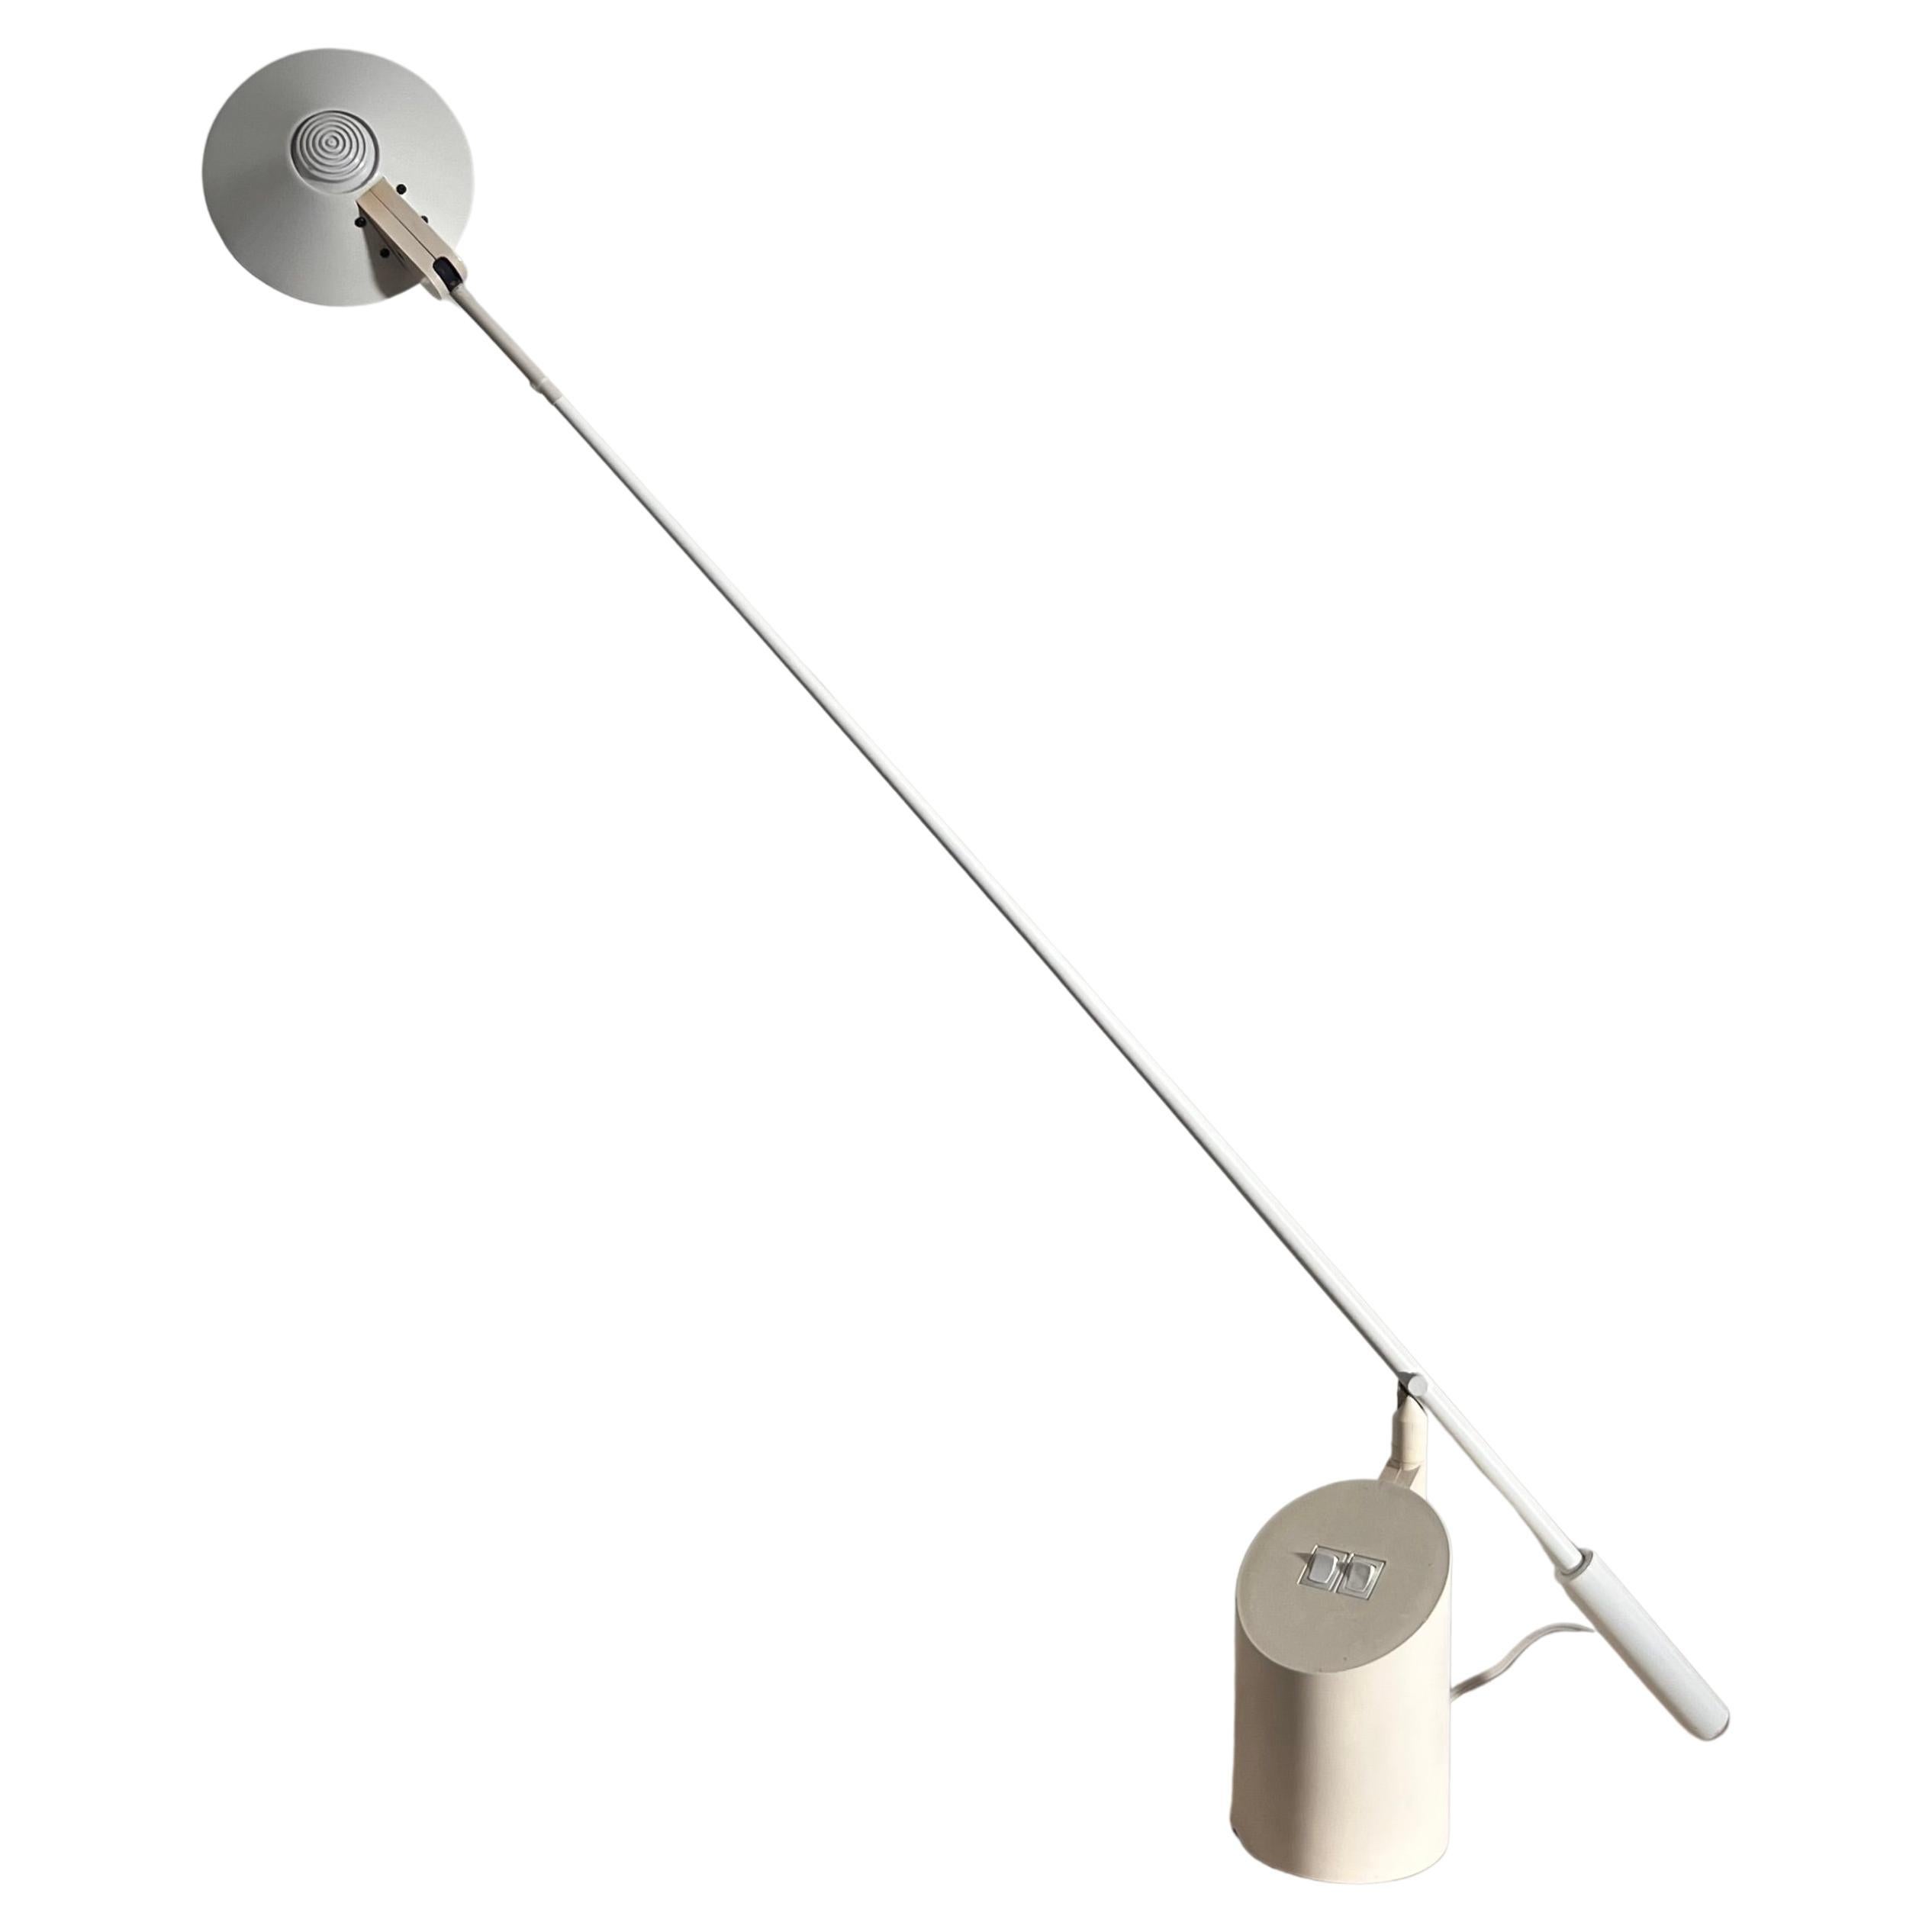 « Feather » Task Lamp by Sonneman for Kovacs, 1989